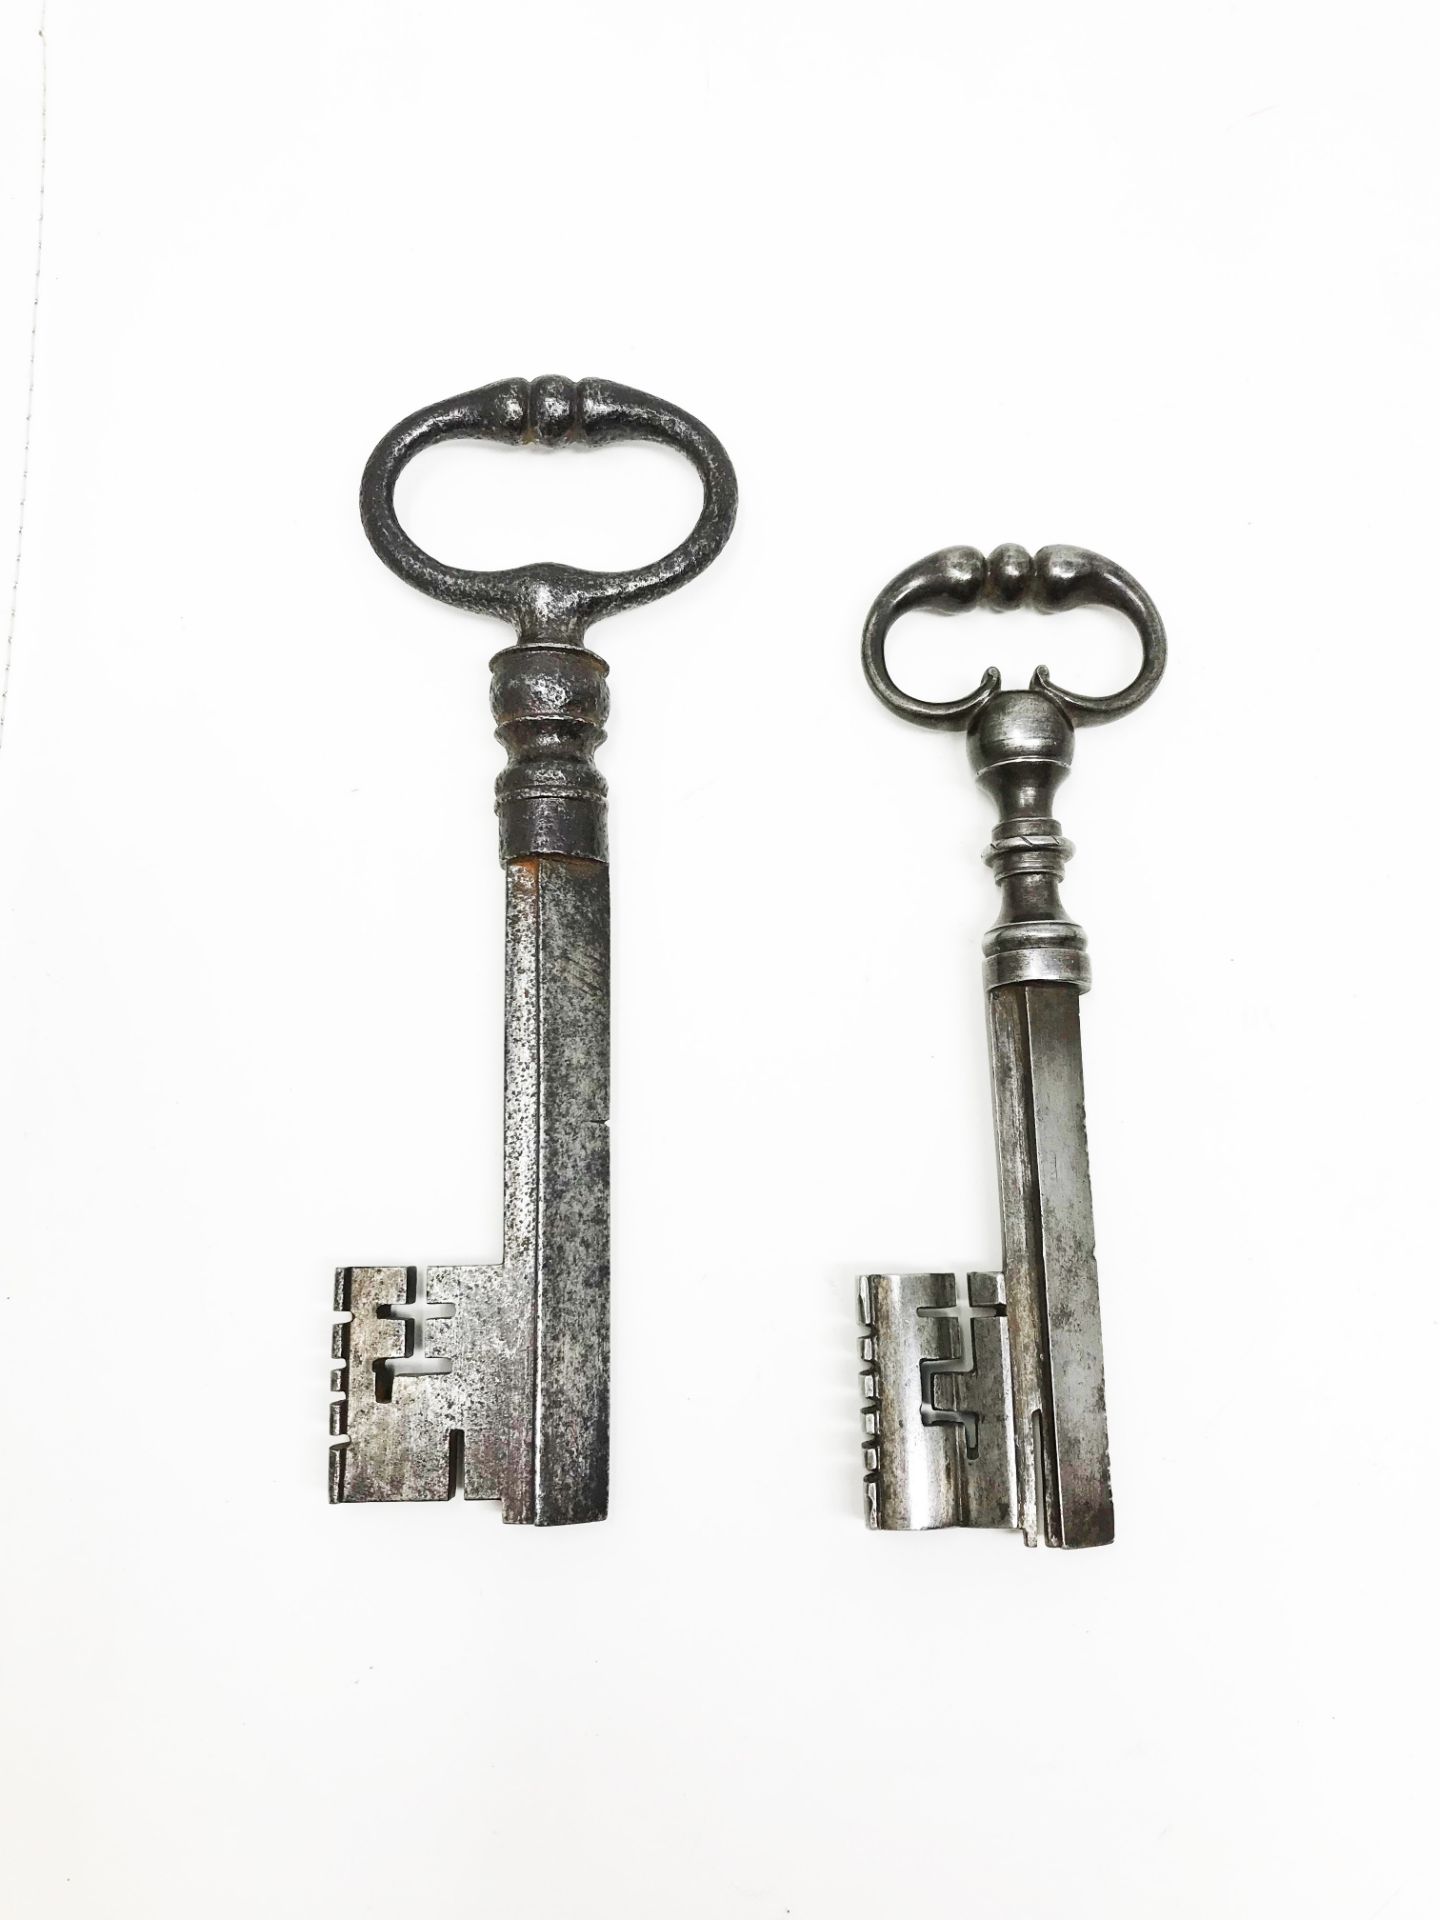 Two keys with frog's legs rings16, 9 - 14, 35 cm Part of the chapter "From Enlightenment to